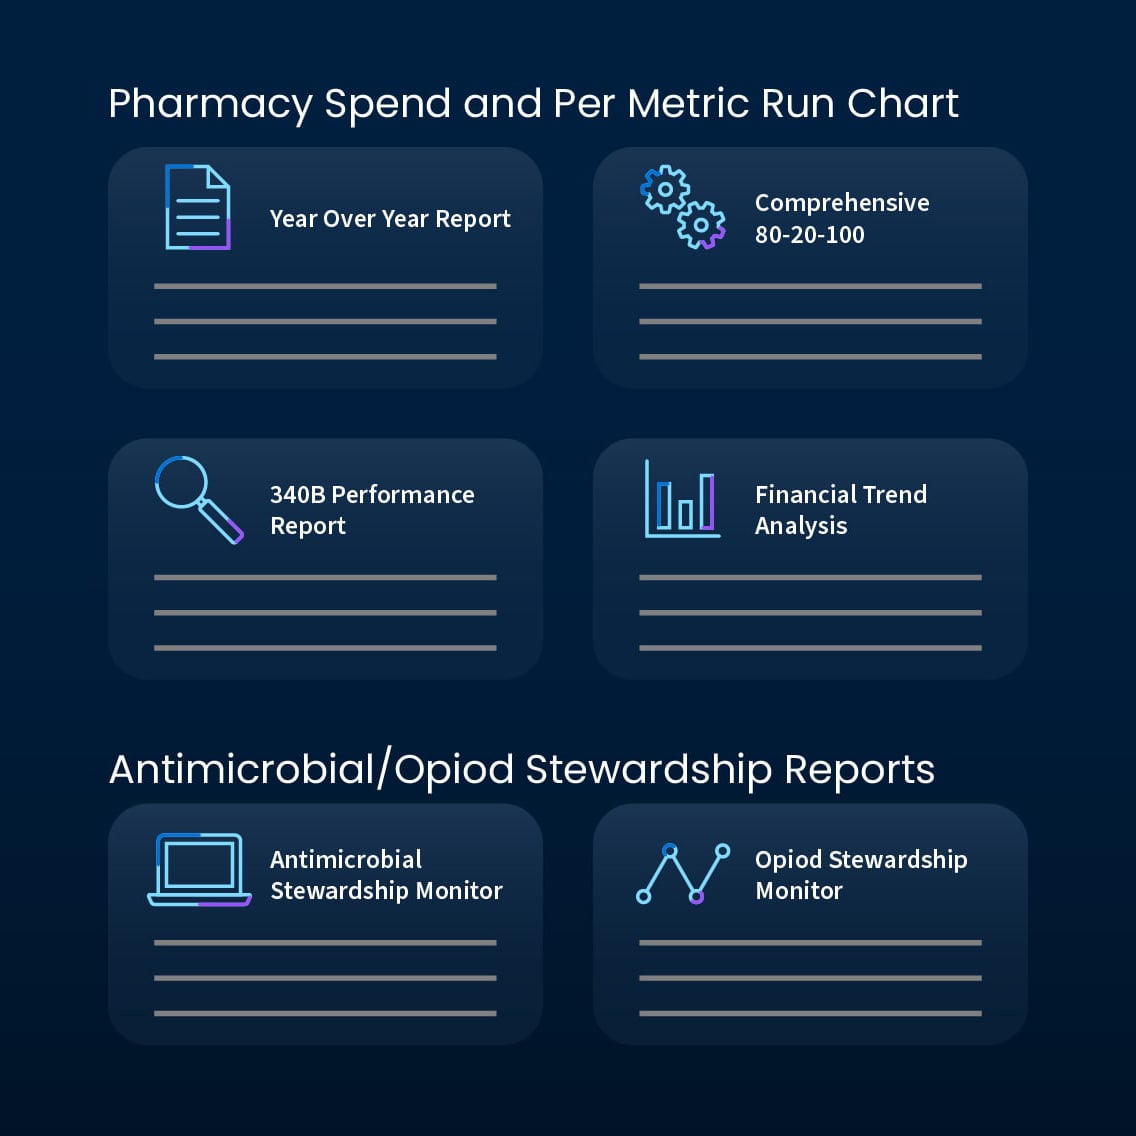 Dashboard view of Pharmacy Spend and Per Metric Run Chart